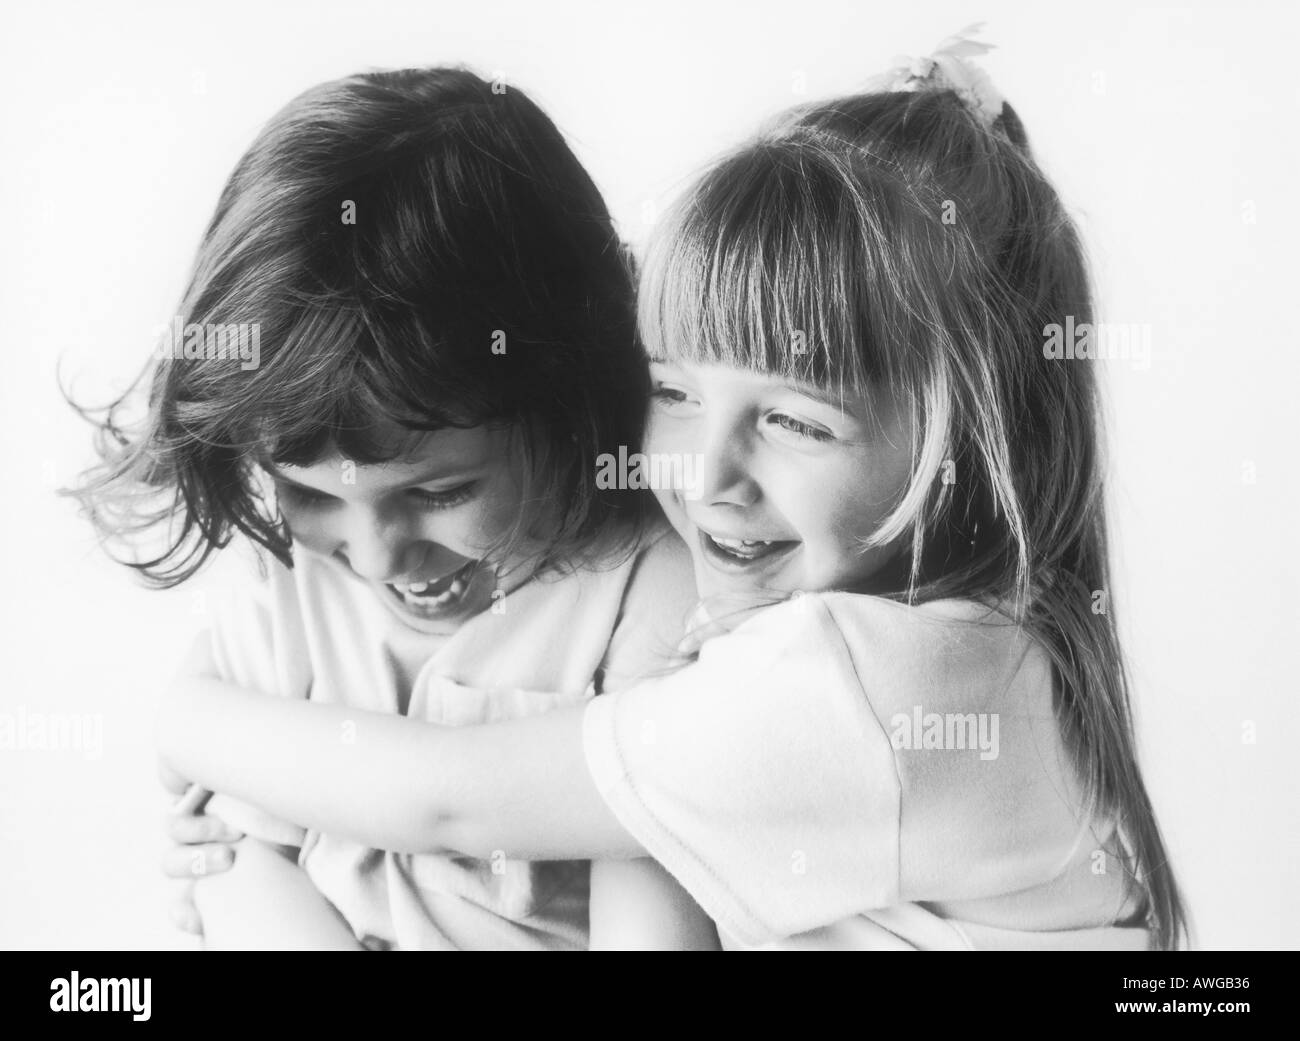 Two young girls one hugging the other Stock Photo